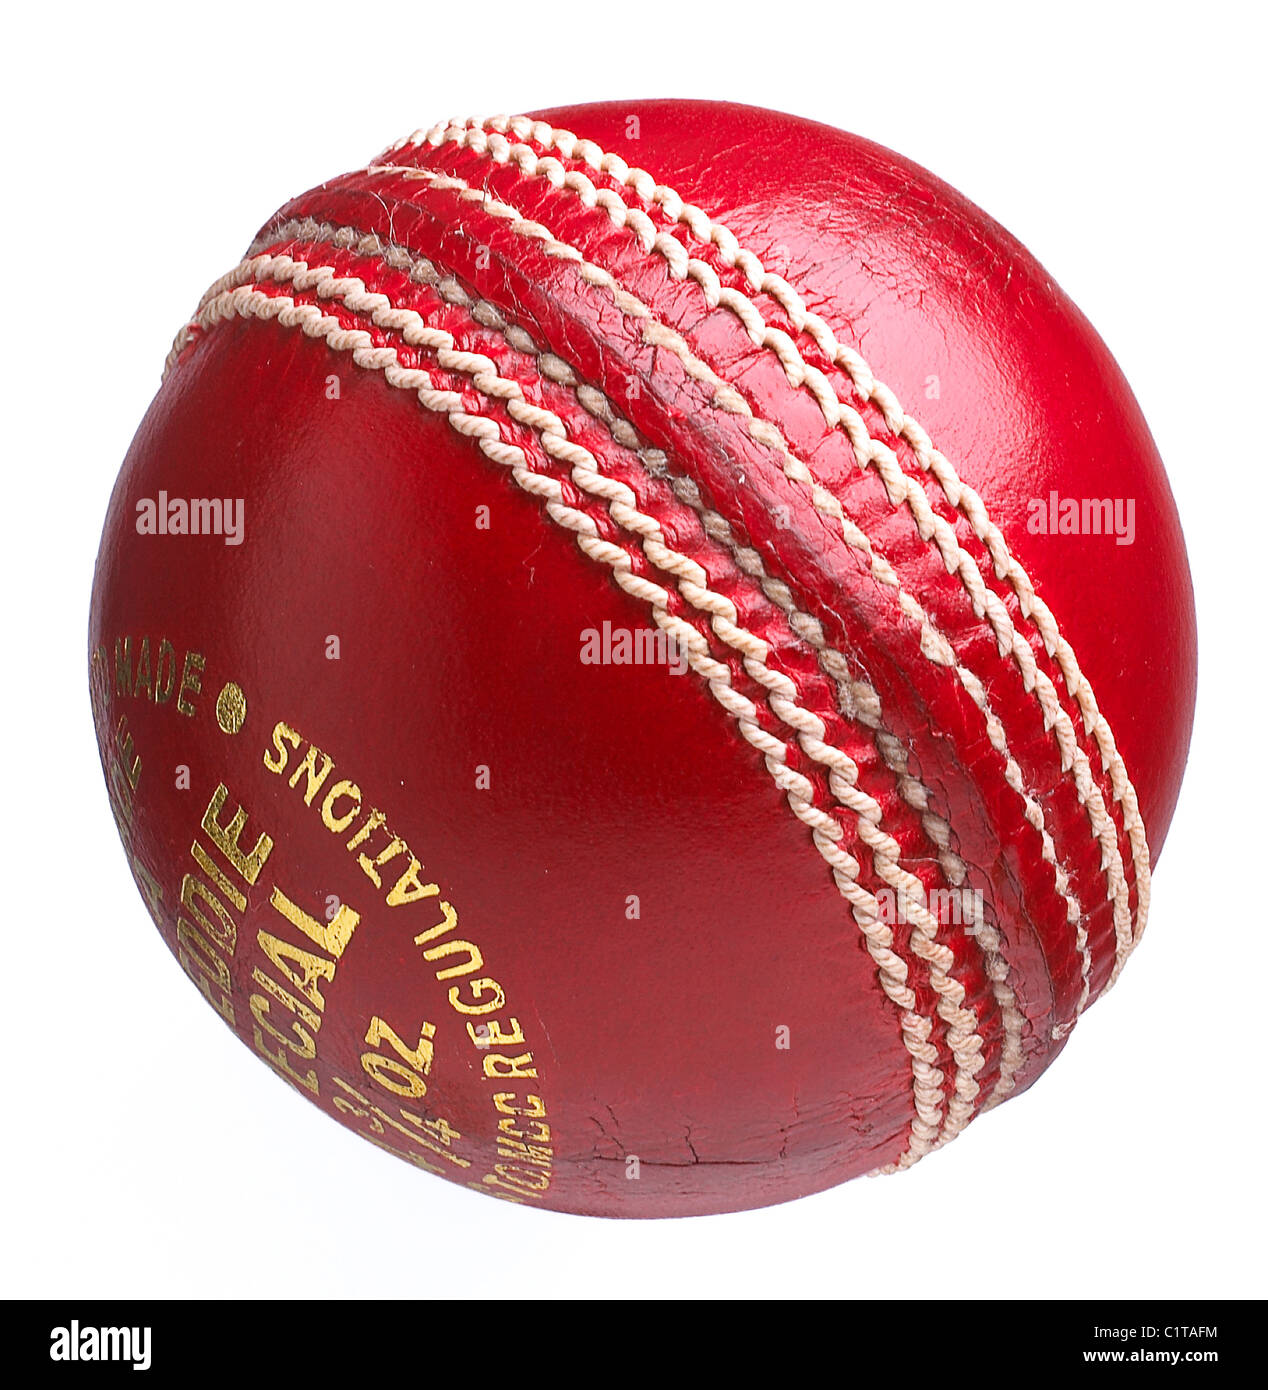 a traditional leather cricket ball on a white background Stock Photo